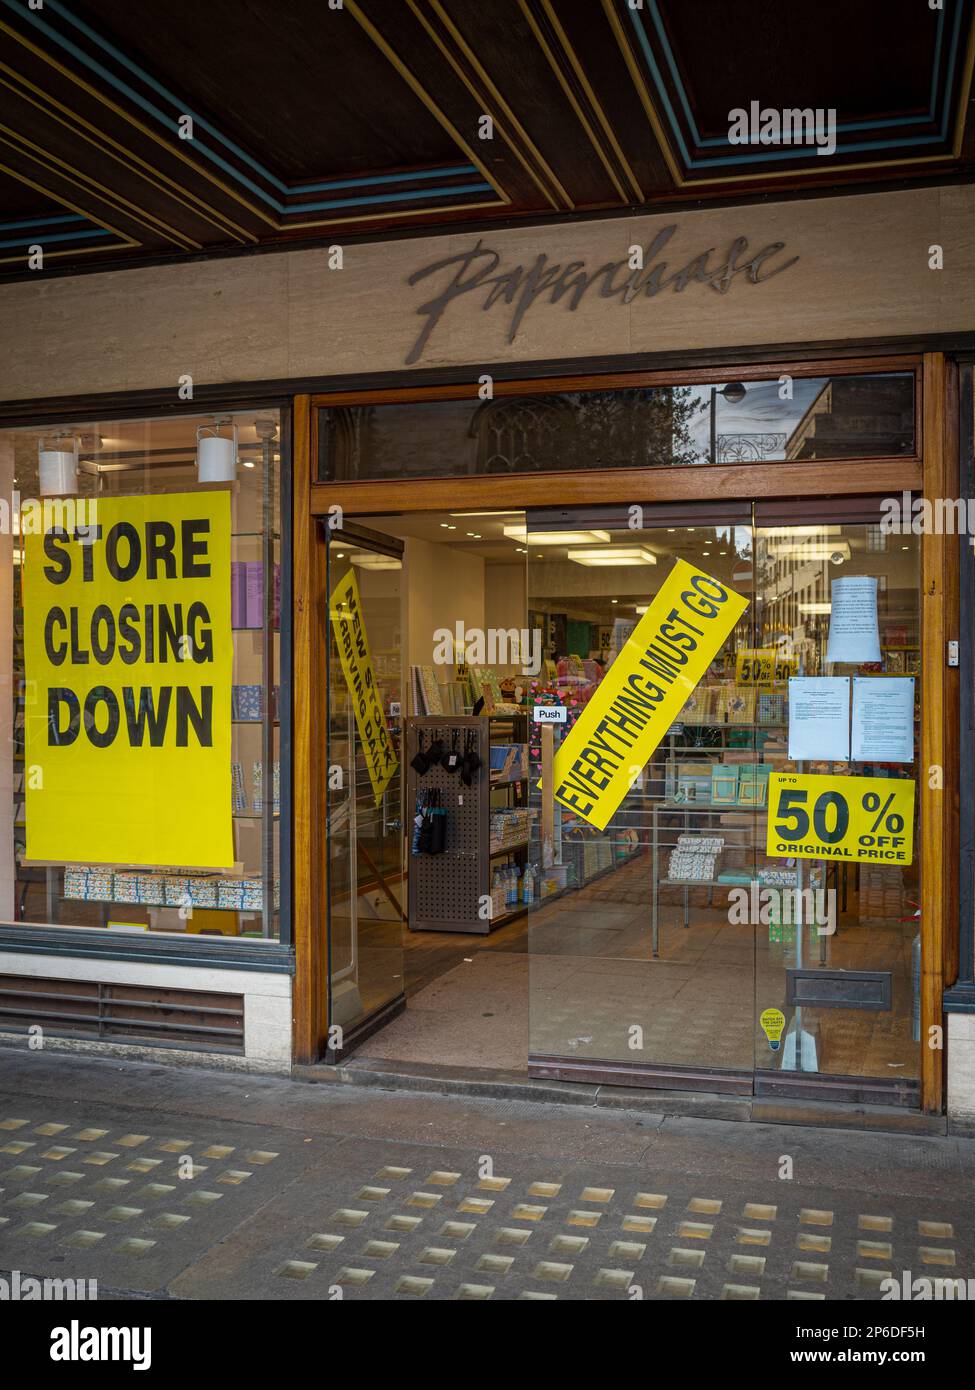 Paperchase closing down sale - Paperchase store closure. Paperchase shop closure. Paperchase is closing a number of stores after the brand was sold. Stock Photo